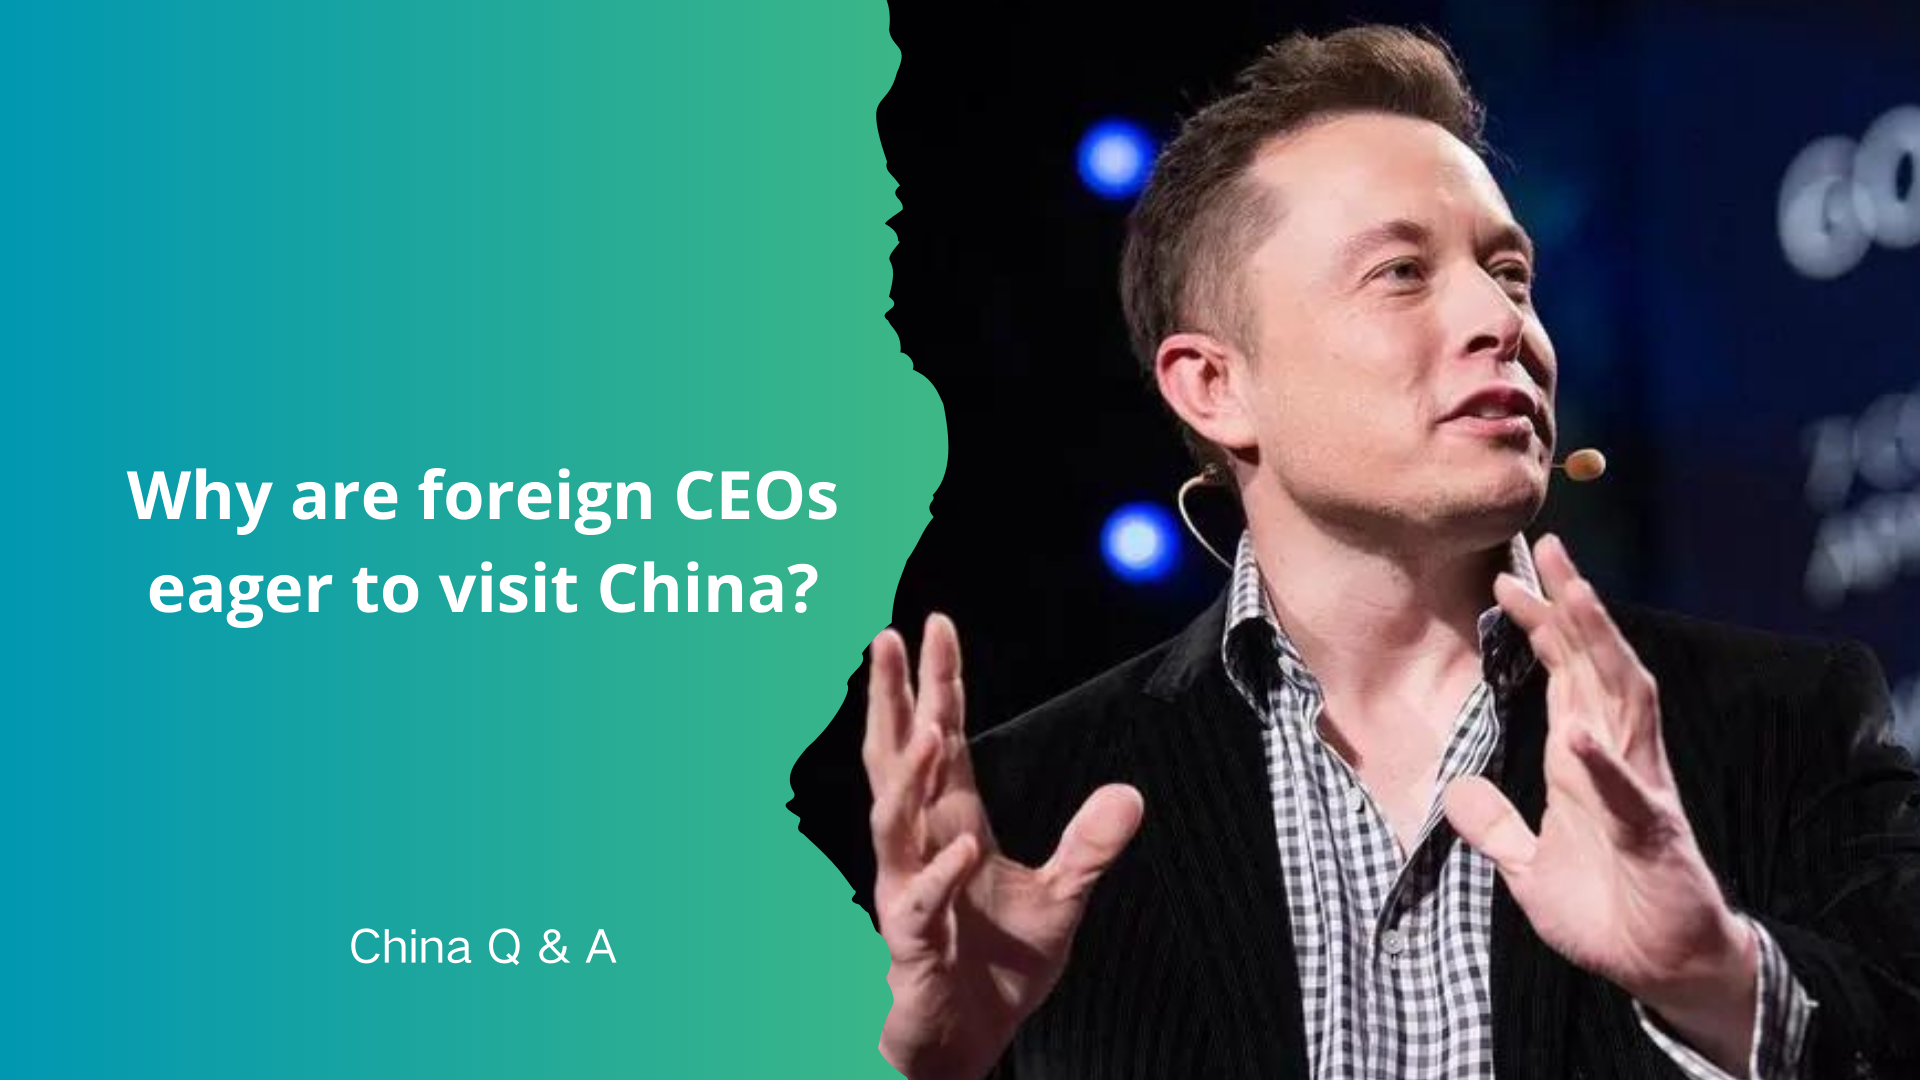 Why are foreign CEOs eager to visit China?